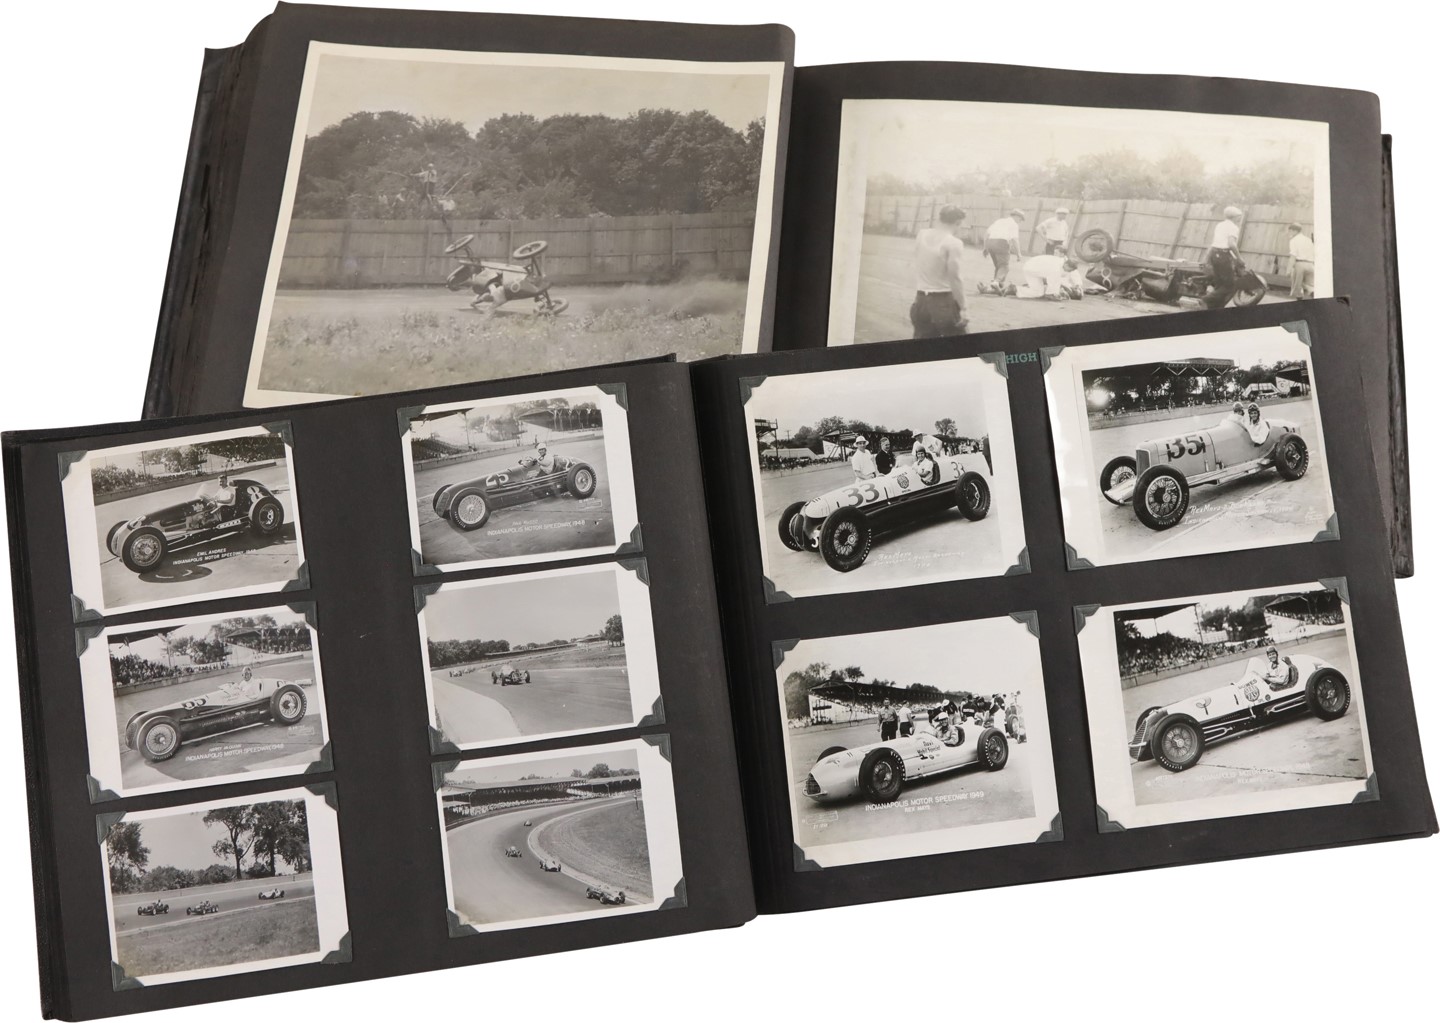 Olympics and All Sports - Amazing 1930s-40s Auto Racing Photography Albums (2)